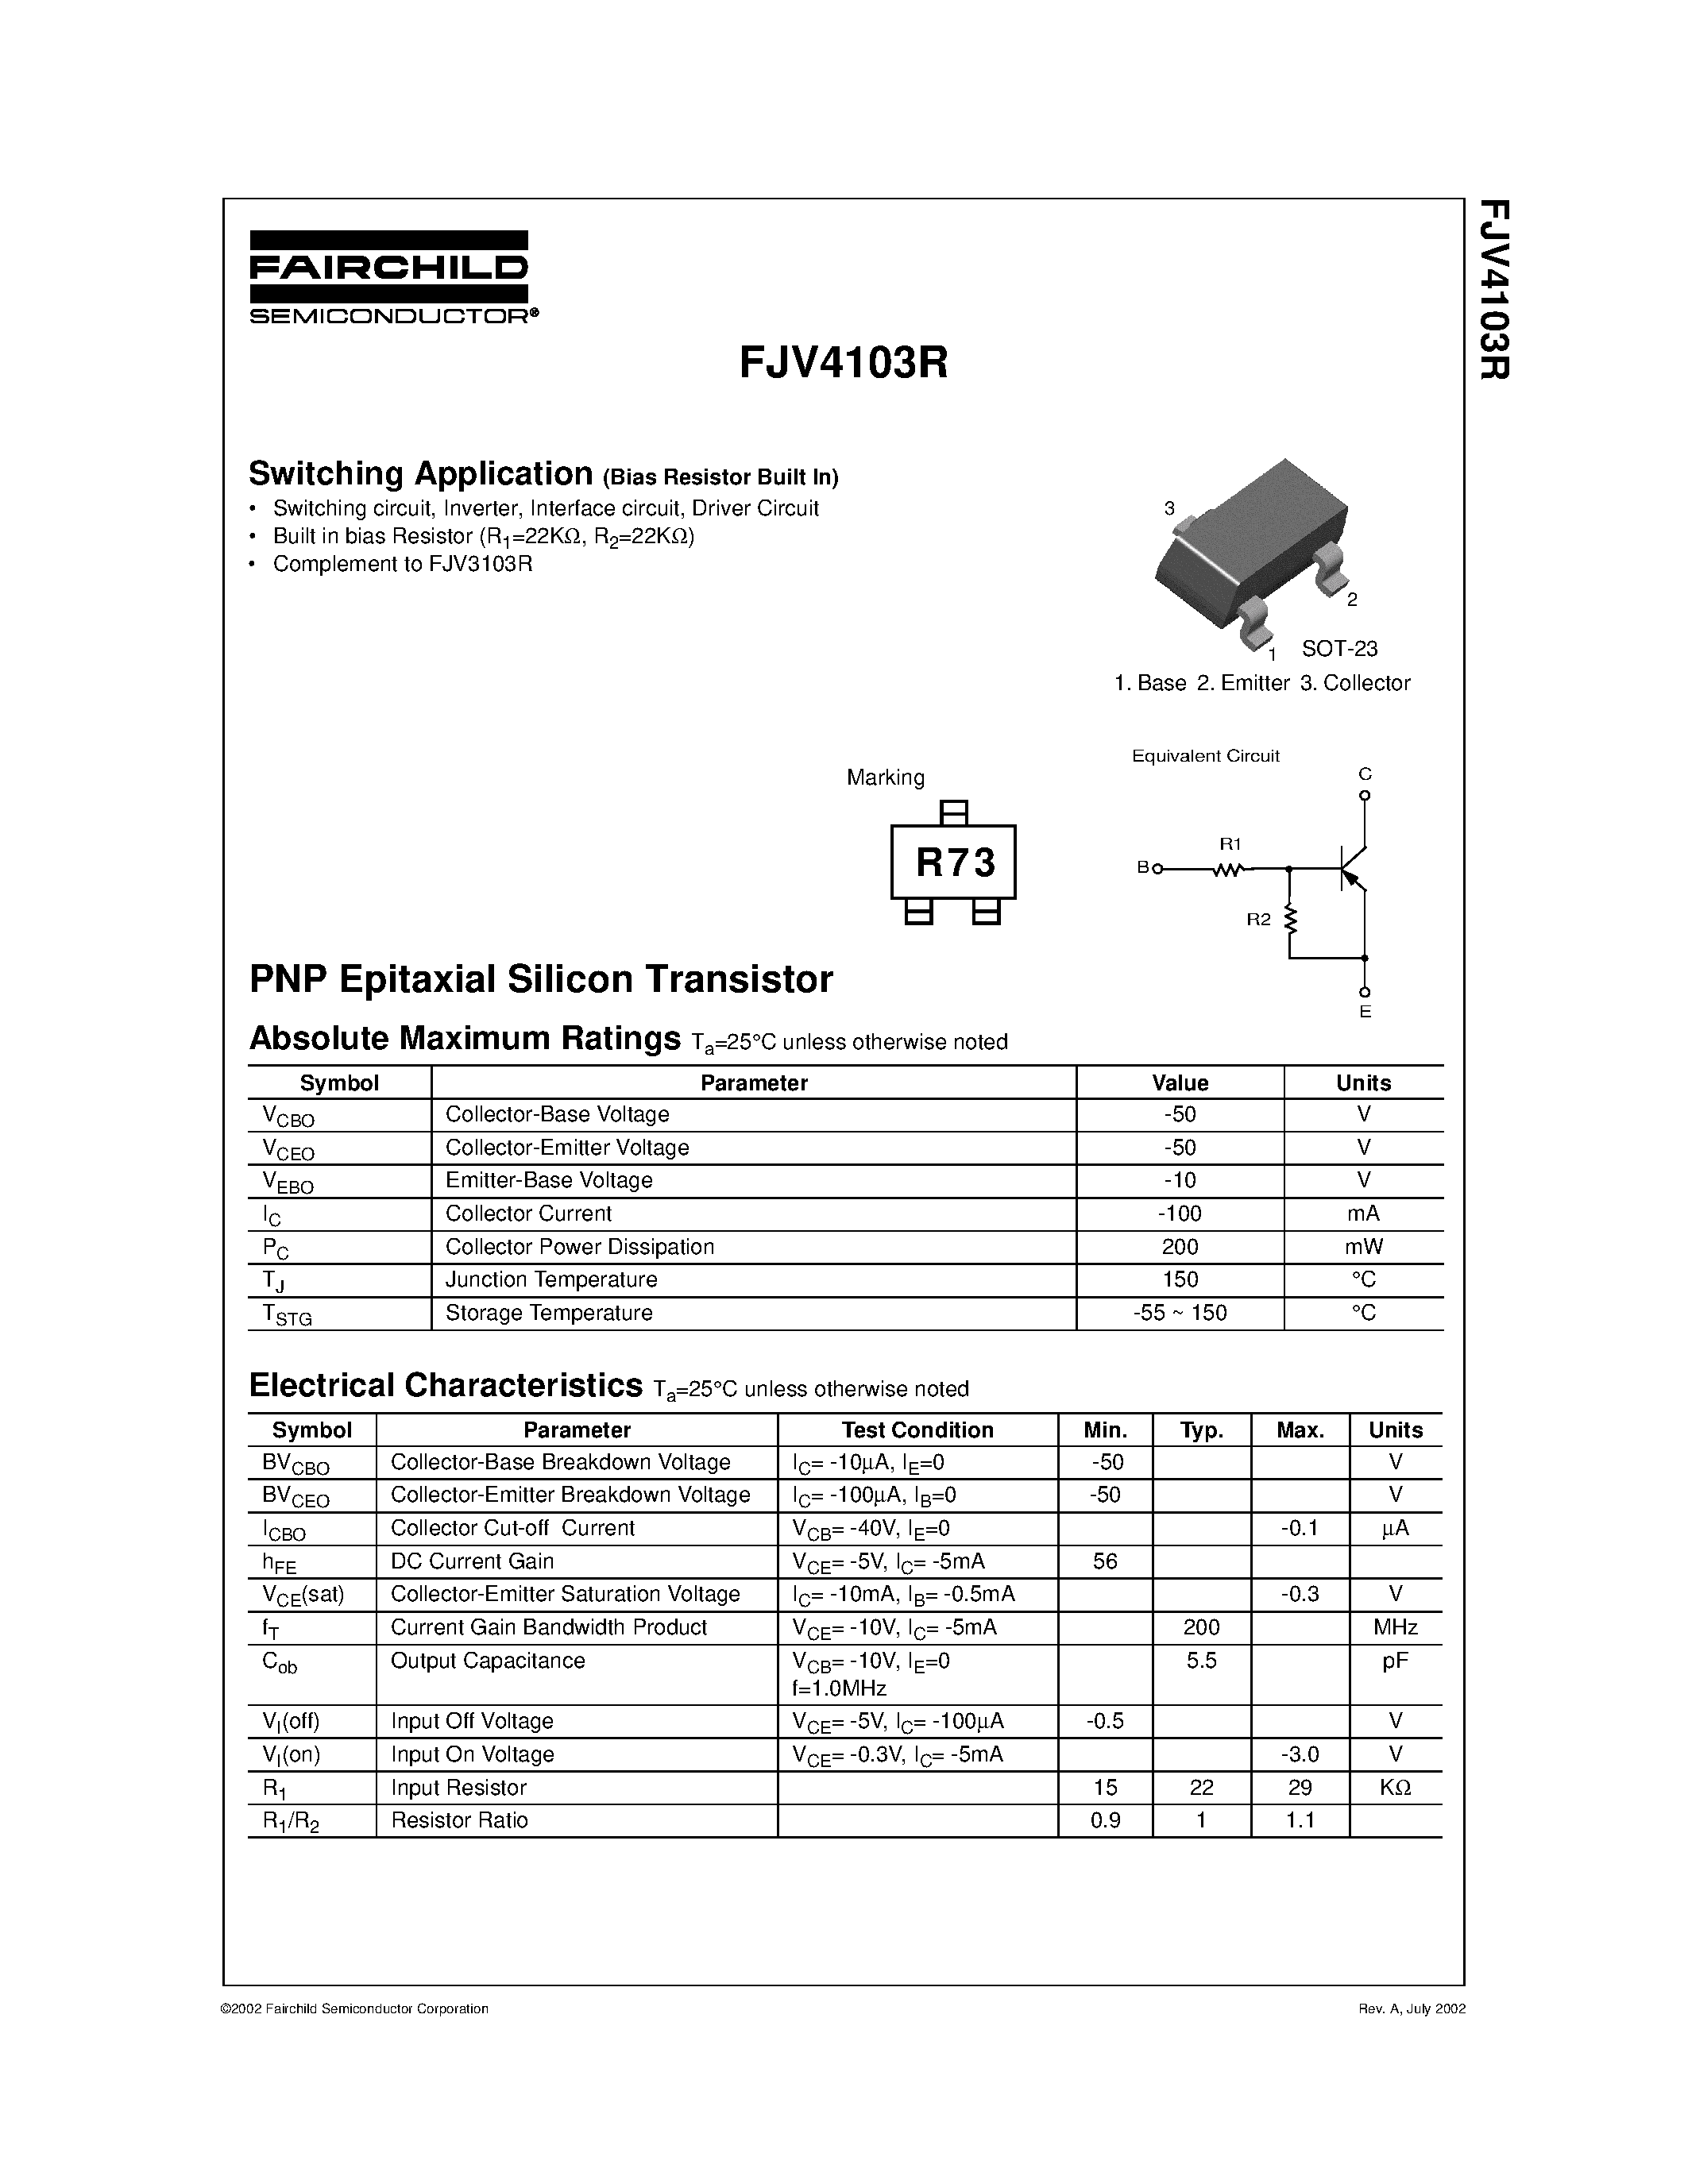 Даташит FJV4103R - PNP Epitaxial Silicon Transistor страница 1